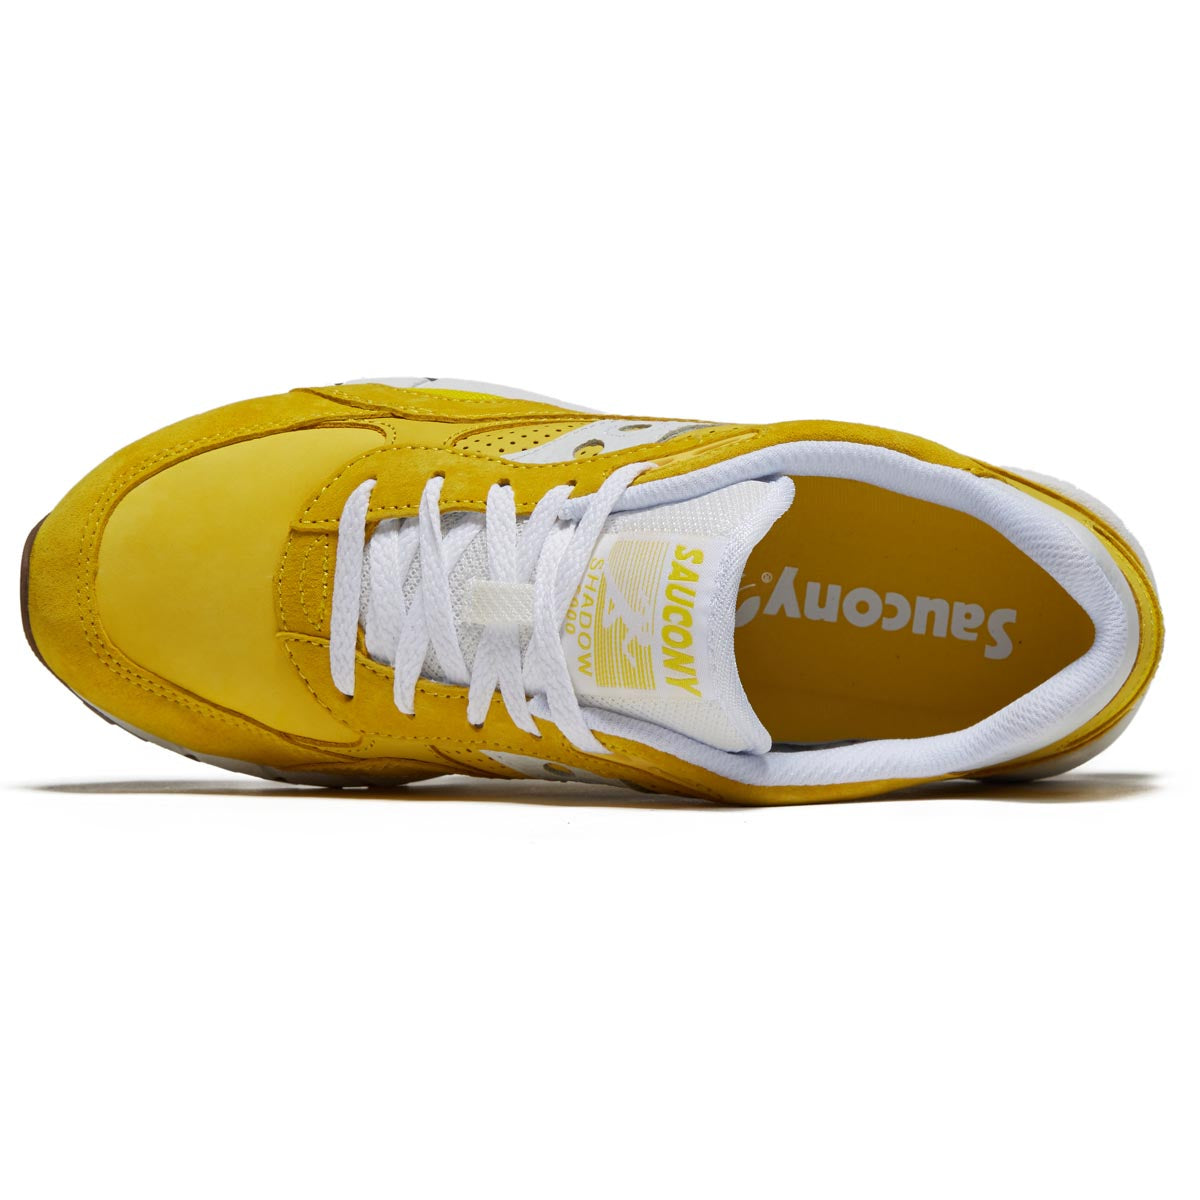 Saucony Shadow 6000 Shoes - Yellow/White image 3